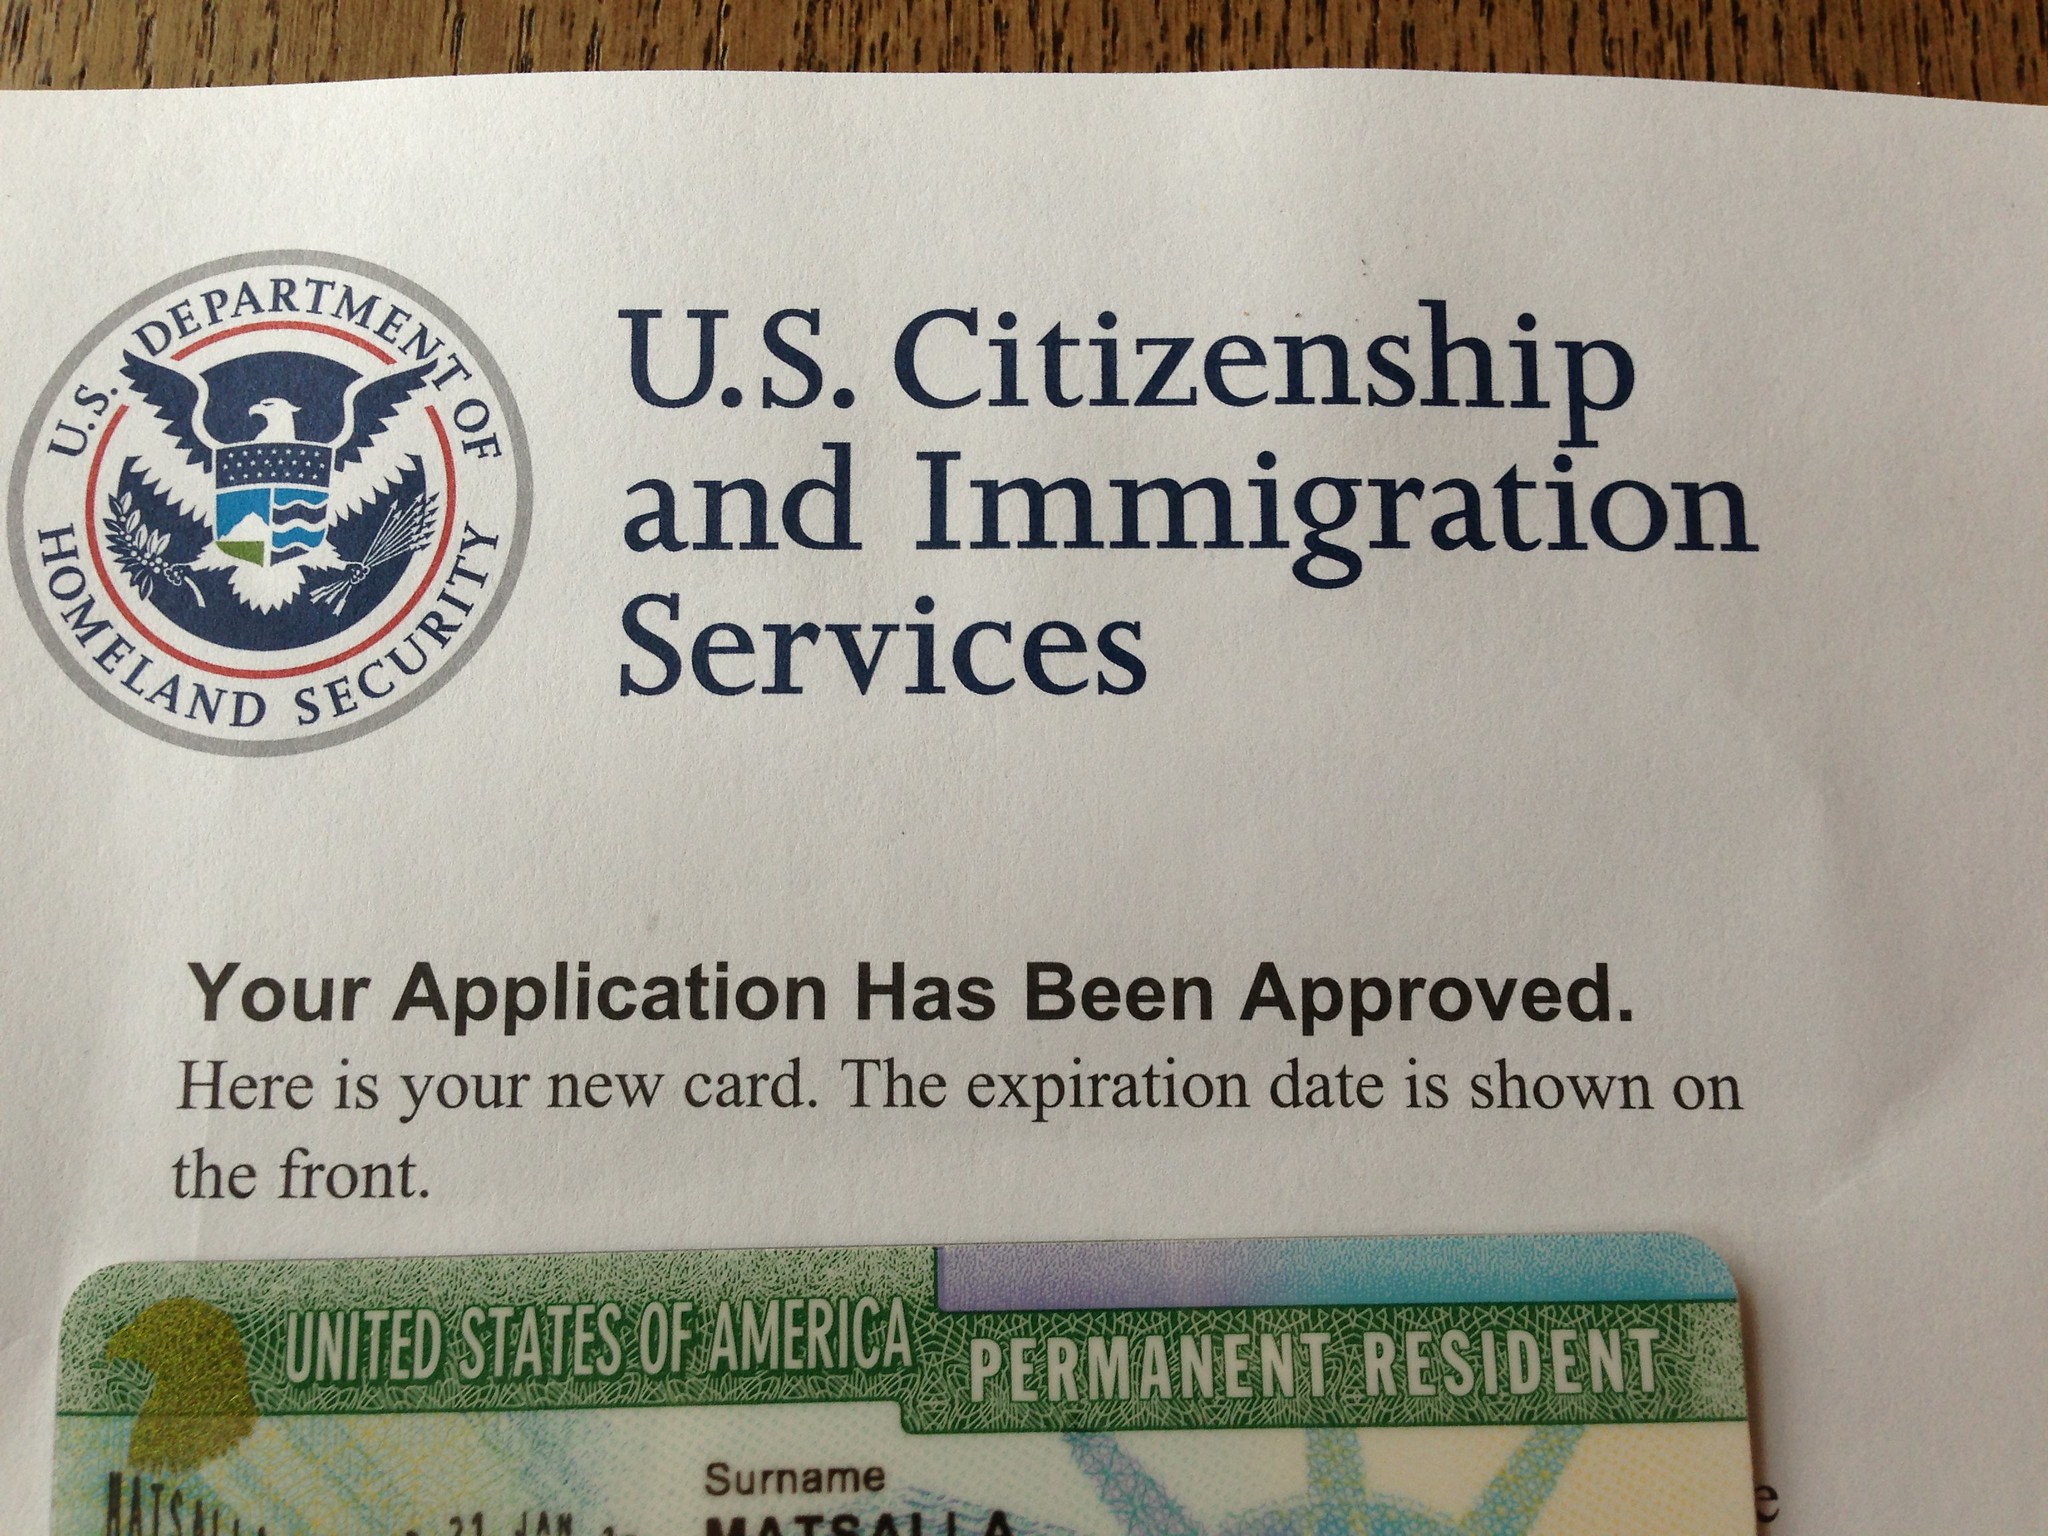 Green card approval letter; image by Jude Matsalla, via Flickr.com, CC BY-NC 2.0 DEED, no changes made.